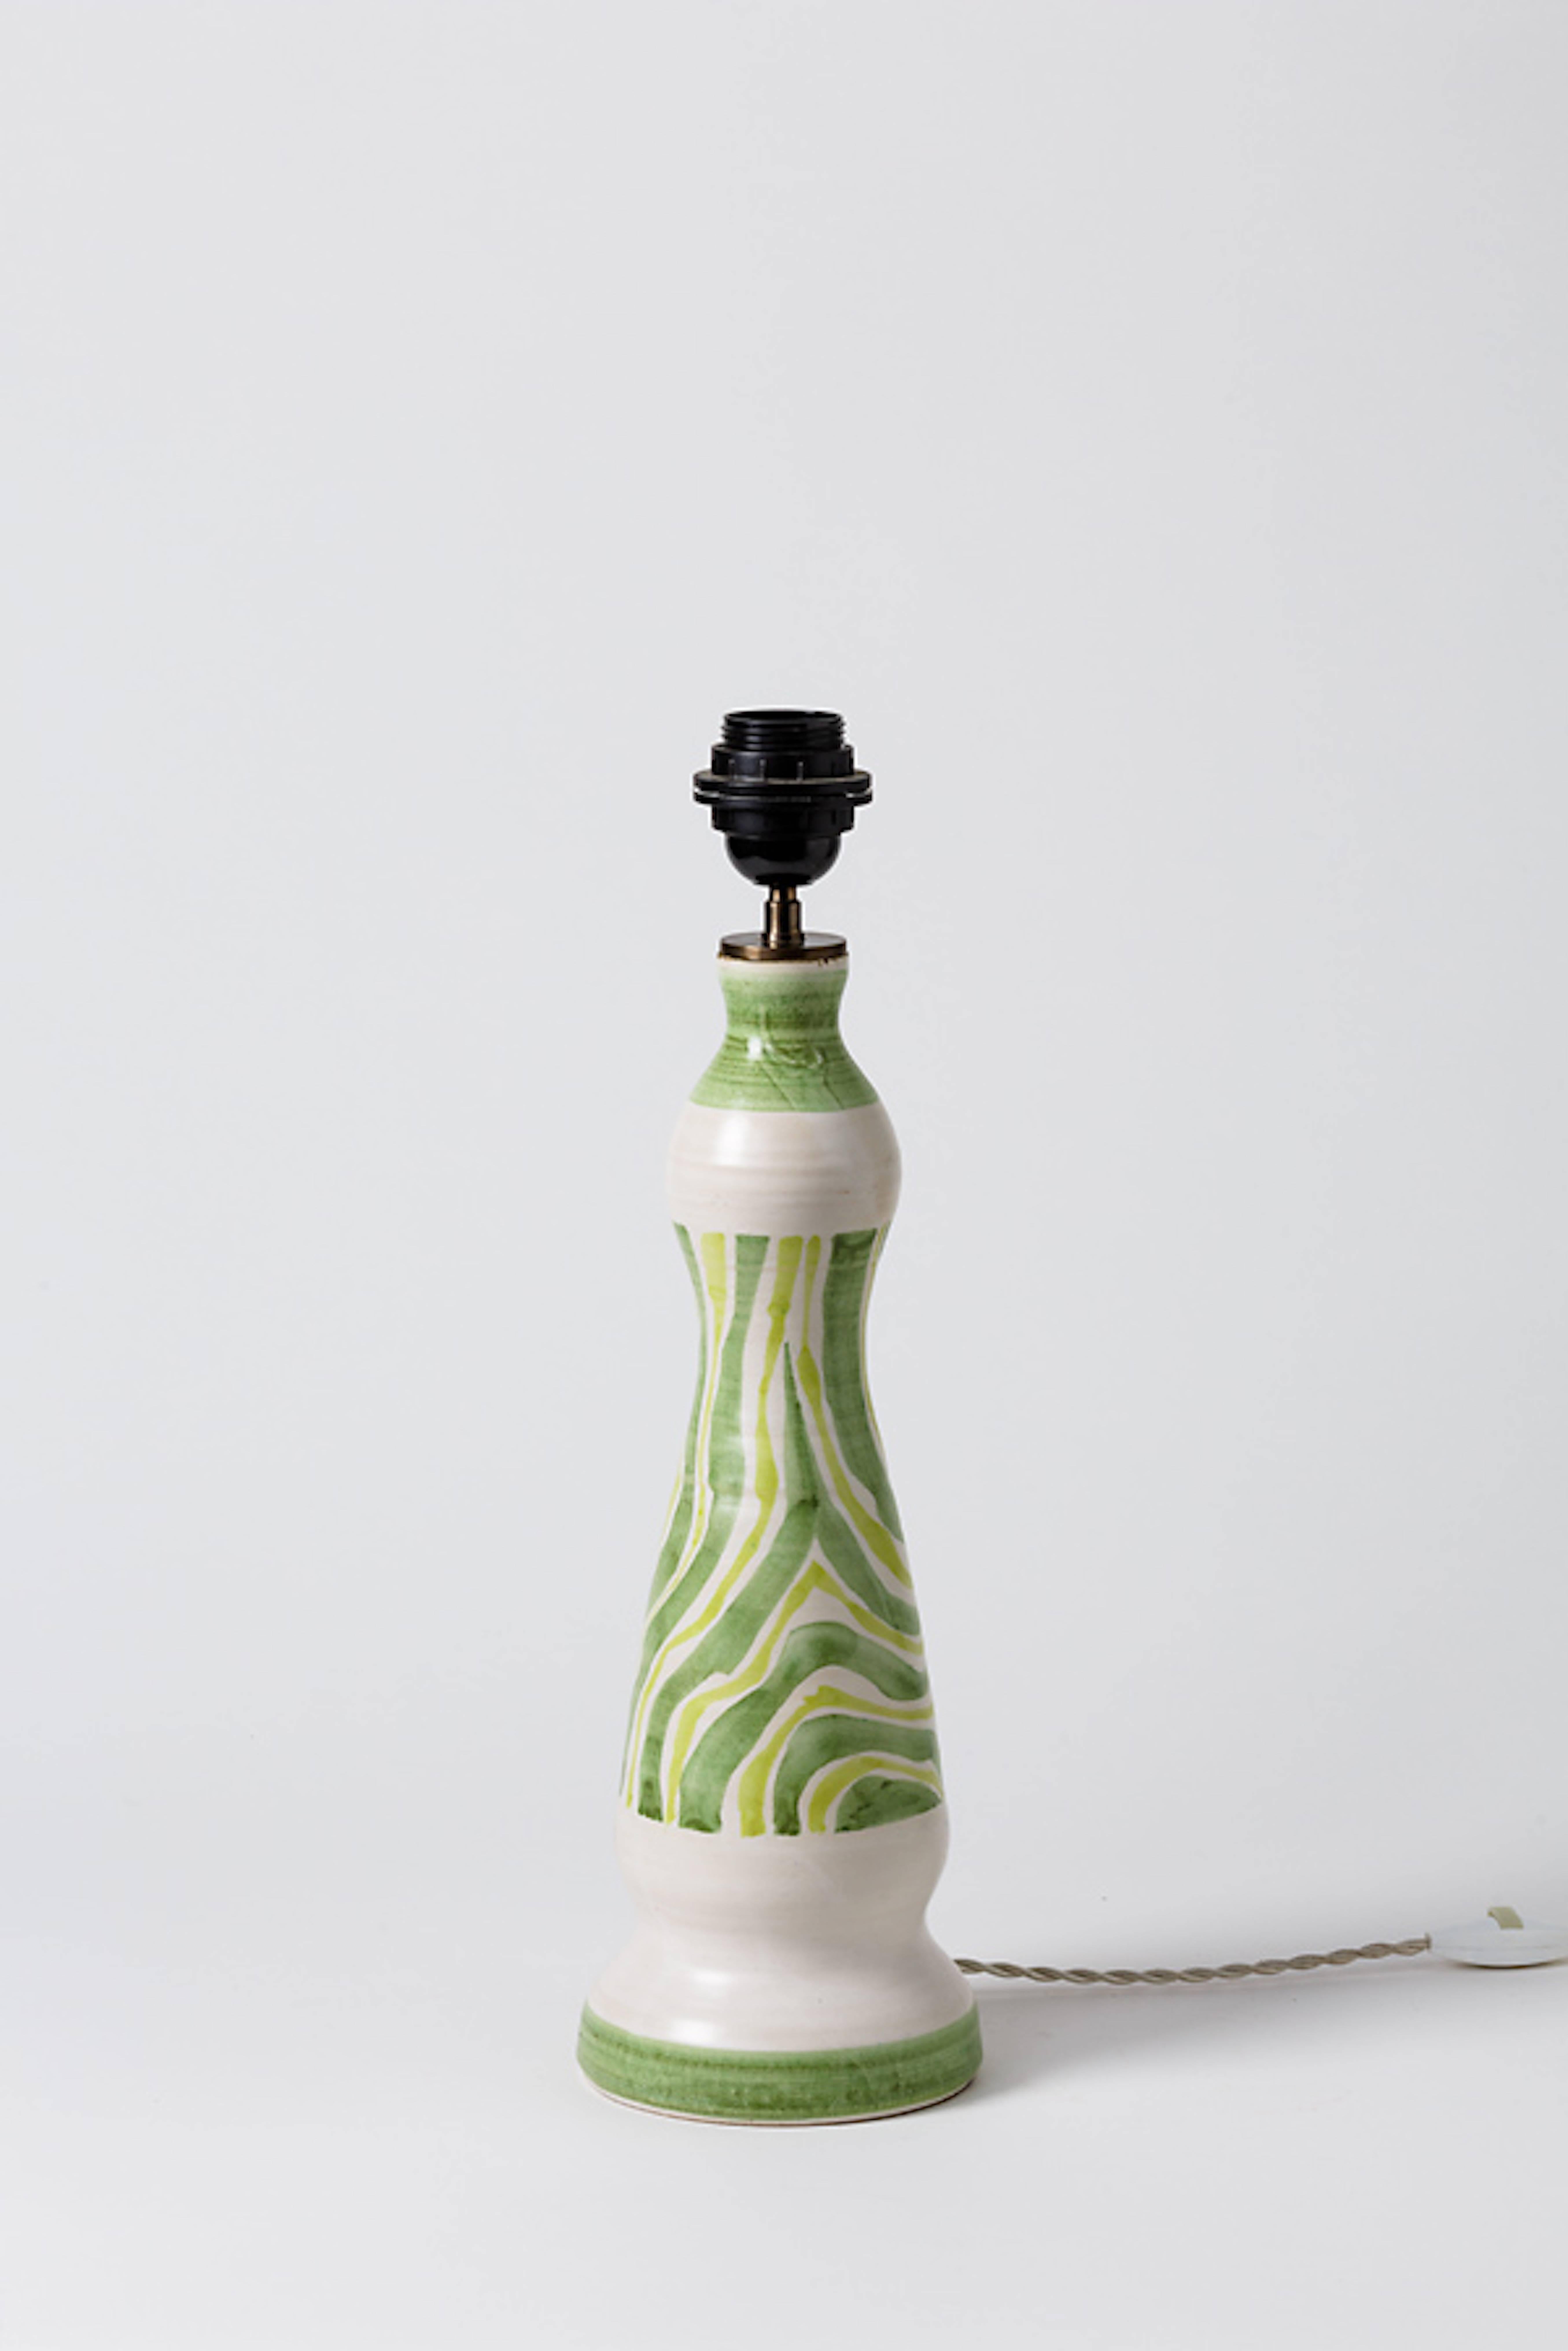 Mid-Century Modern White and Green Ceramic Lamp by Robert Deblander, circa 1960 For Sale